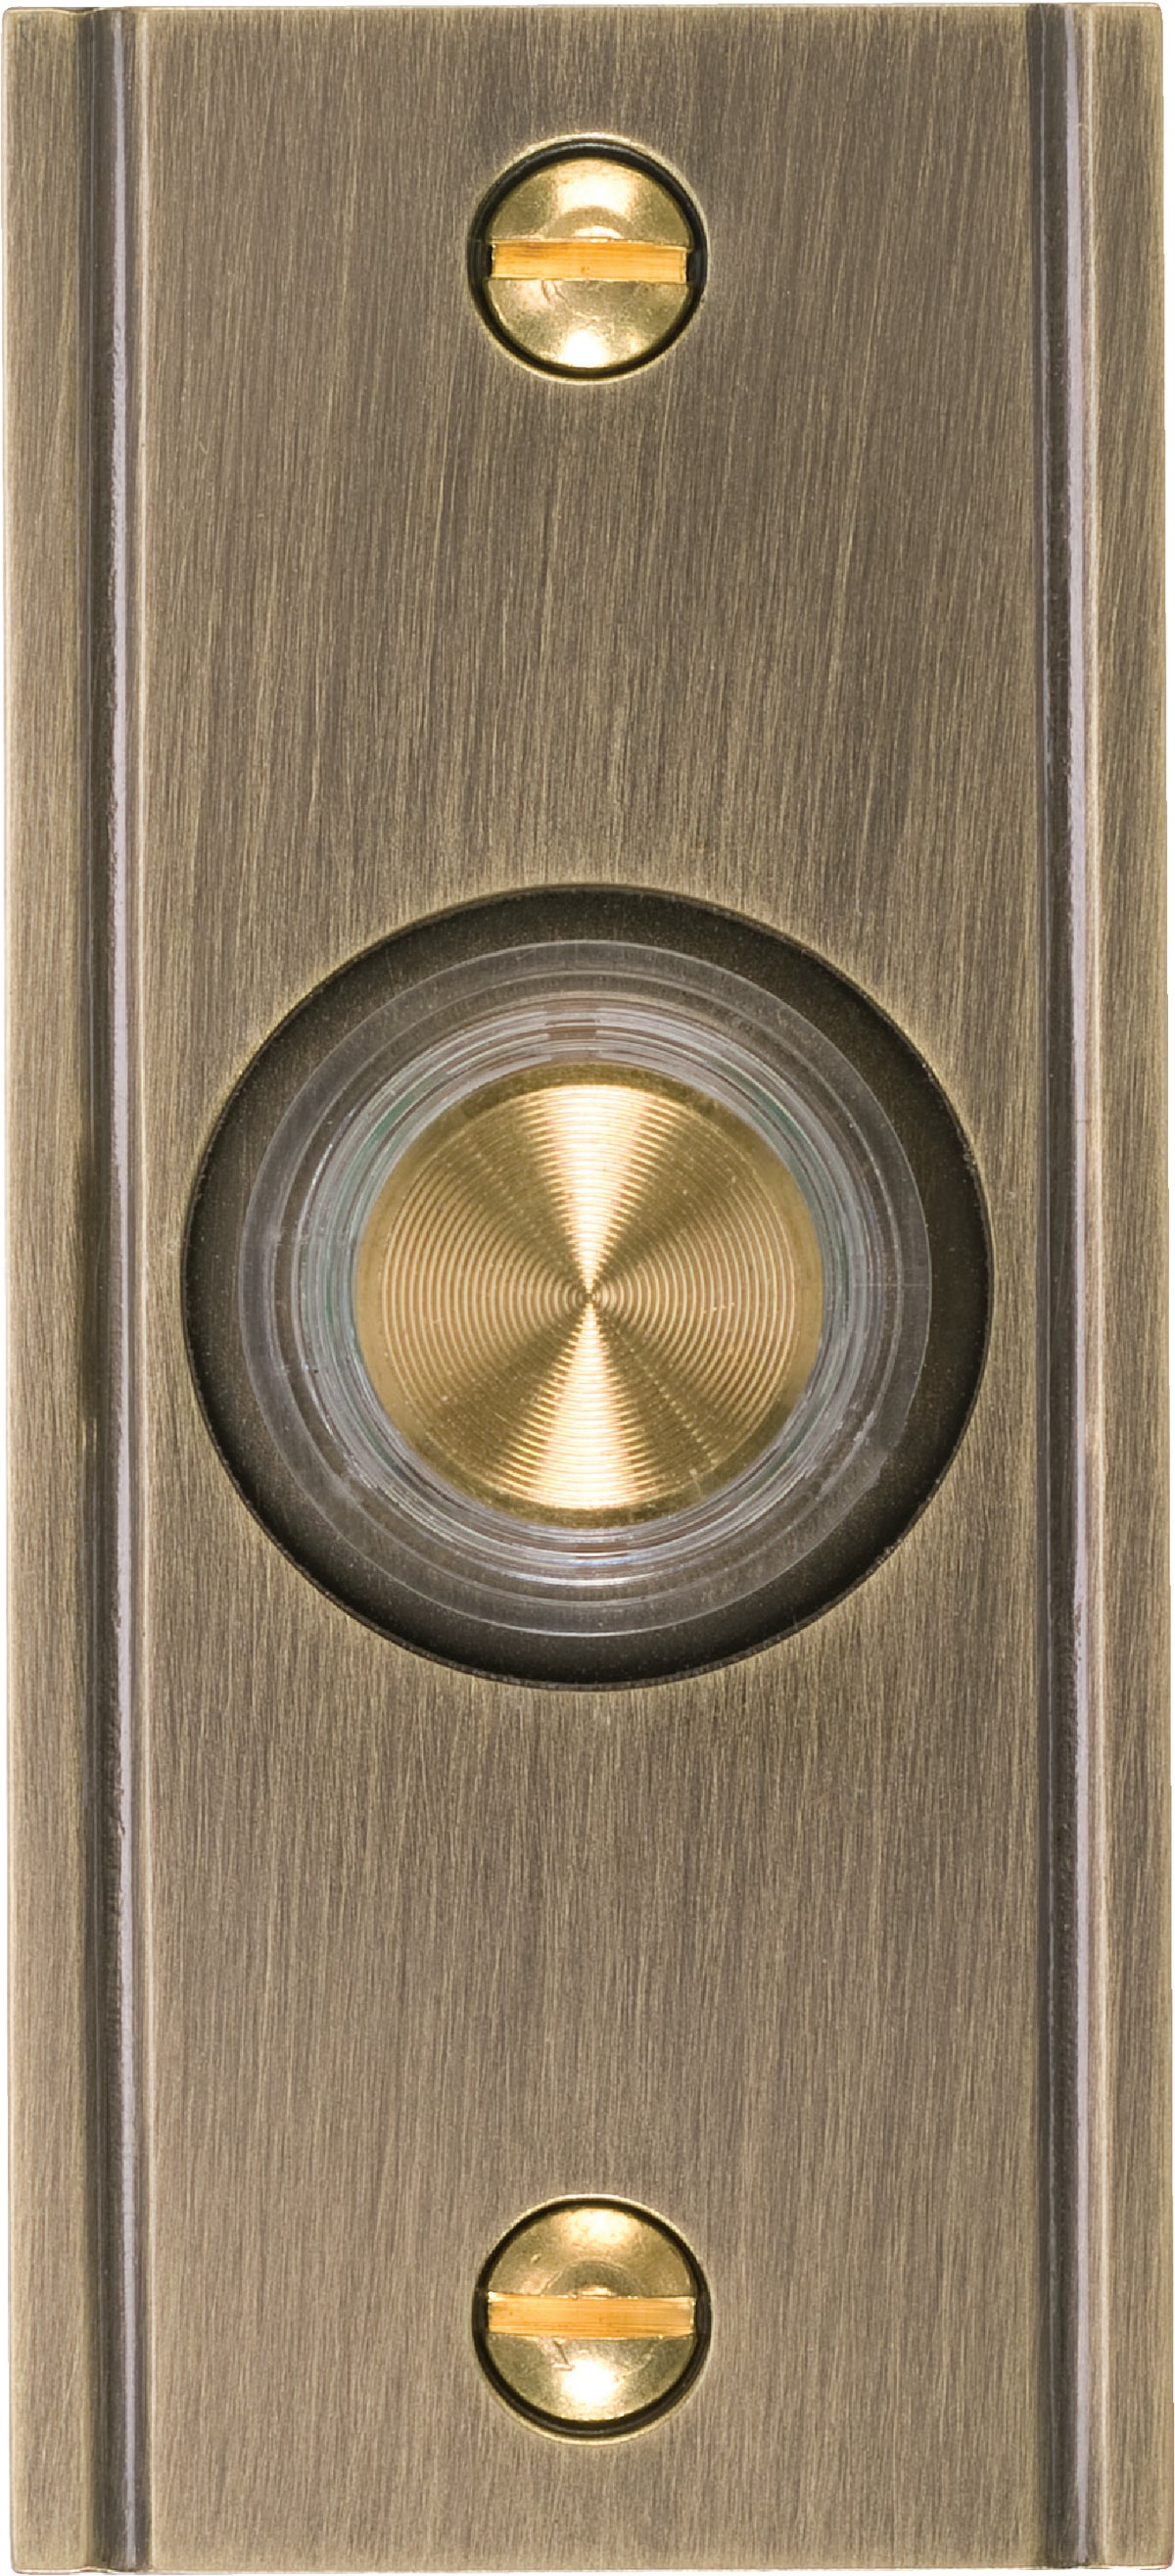 IQ America Wired Oil Rubbed Bronze Medallion Design Lighted Doorbell Push-Button